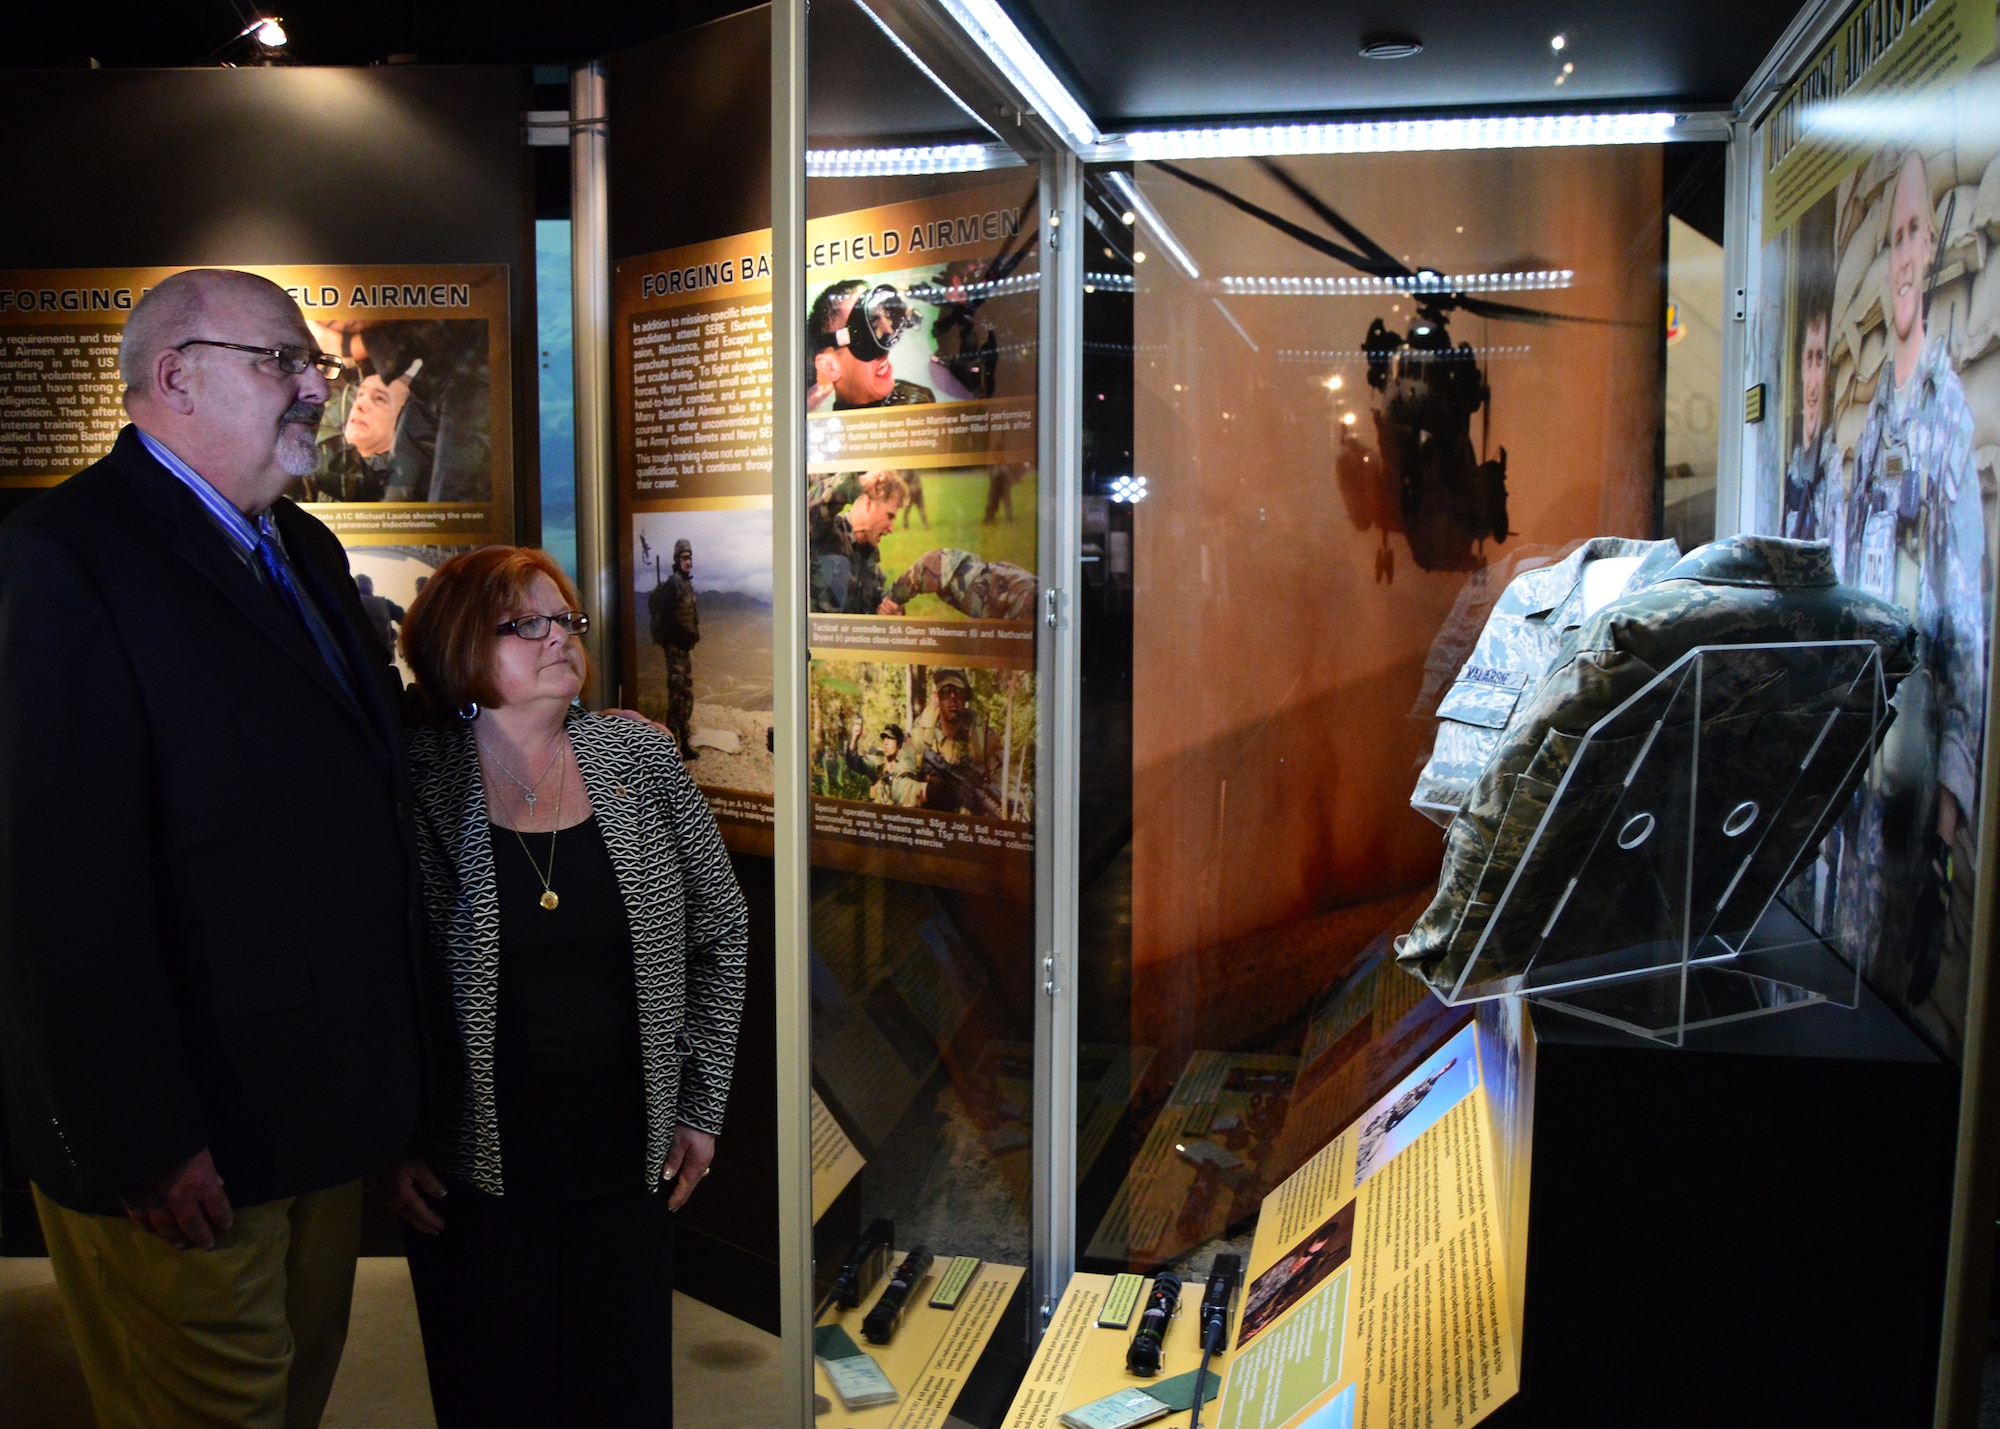 DAYTON, Ohio -- Parents of SrA Smith view the "Duty First, Always Ready" exhibit where their son and SrA Malarsie are represented. This exhibit located in the Cold War Gallery at the National Museum of the U.S. Air Force, highlights the service of Senior Airmen Michael Malarsie and Bradley Smith, a two-man Joint Terminal Attack Controller (JTAC) who deployed together to Afghanistan in December 2009. (U.S. Air Force photo) 
